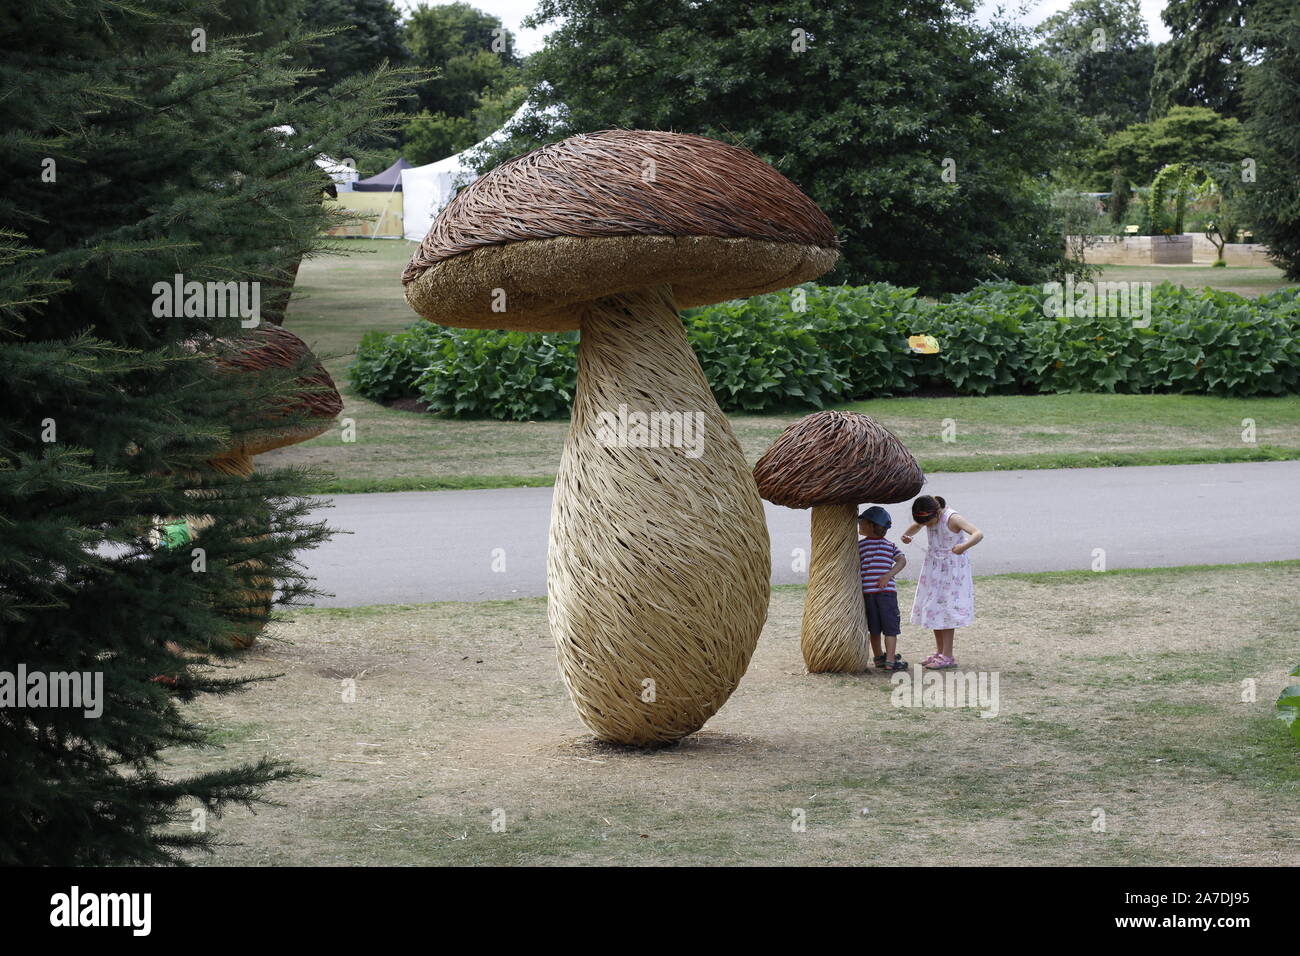 Children Playing Under A Giant Man Made Mushroom Or Toadstool In A